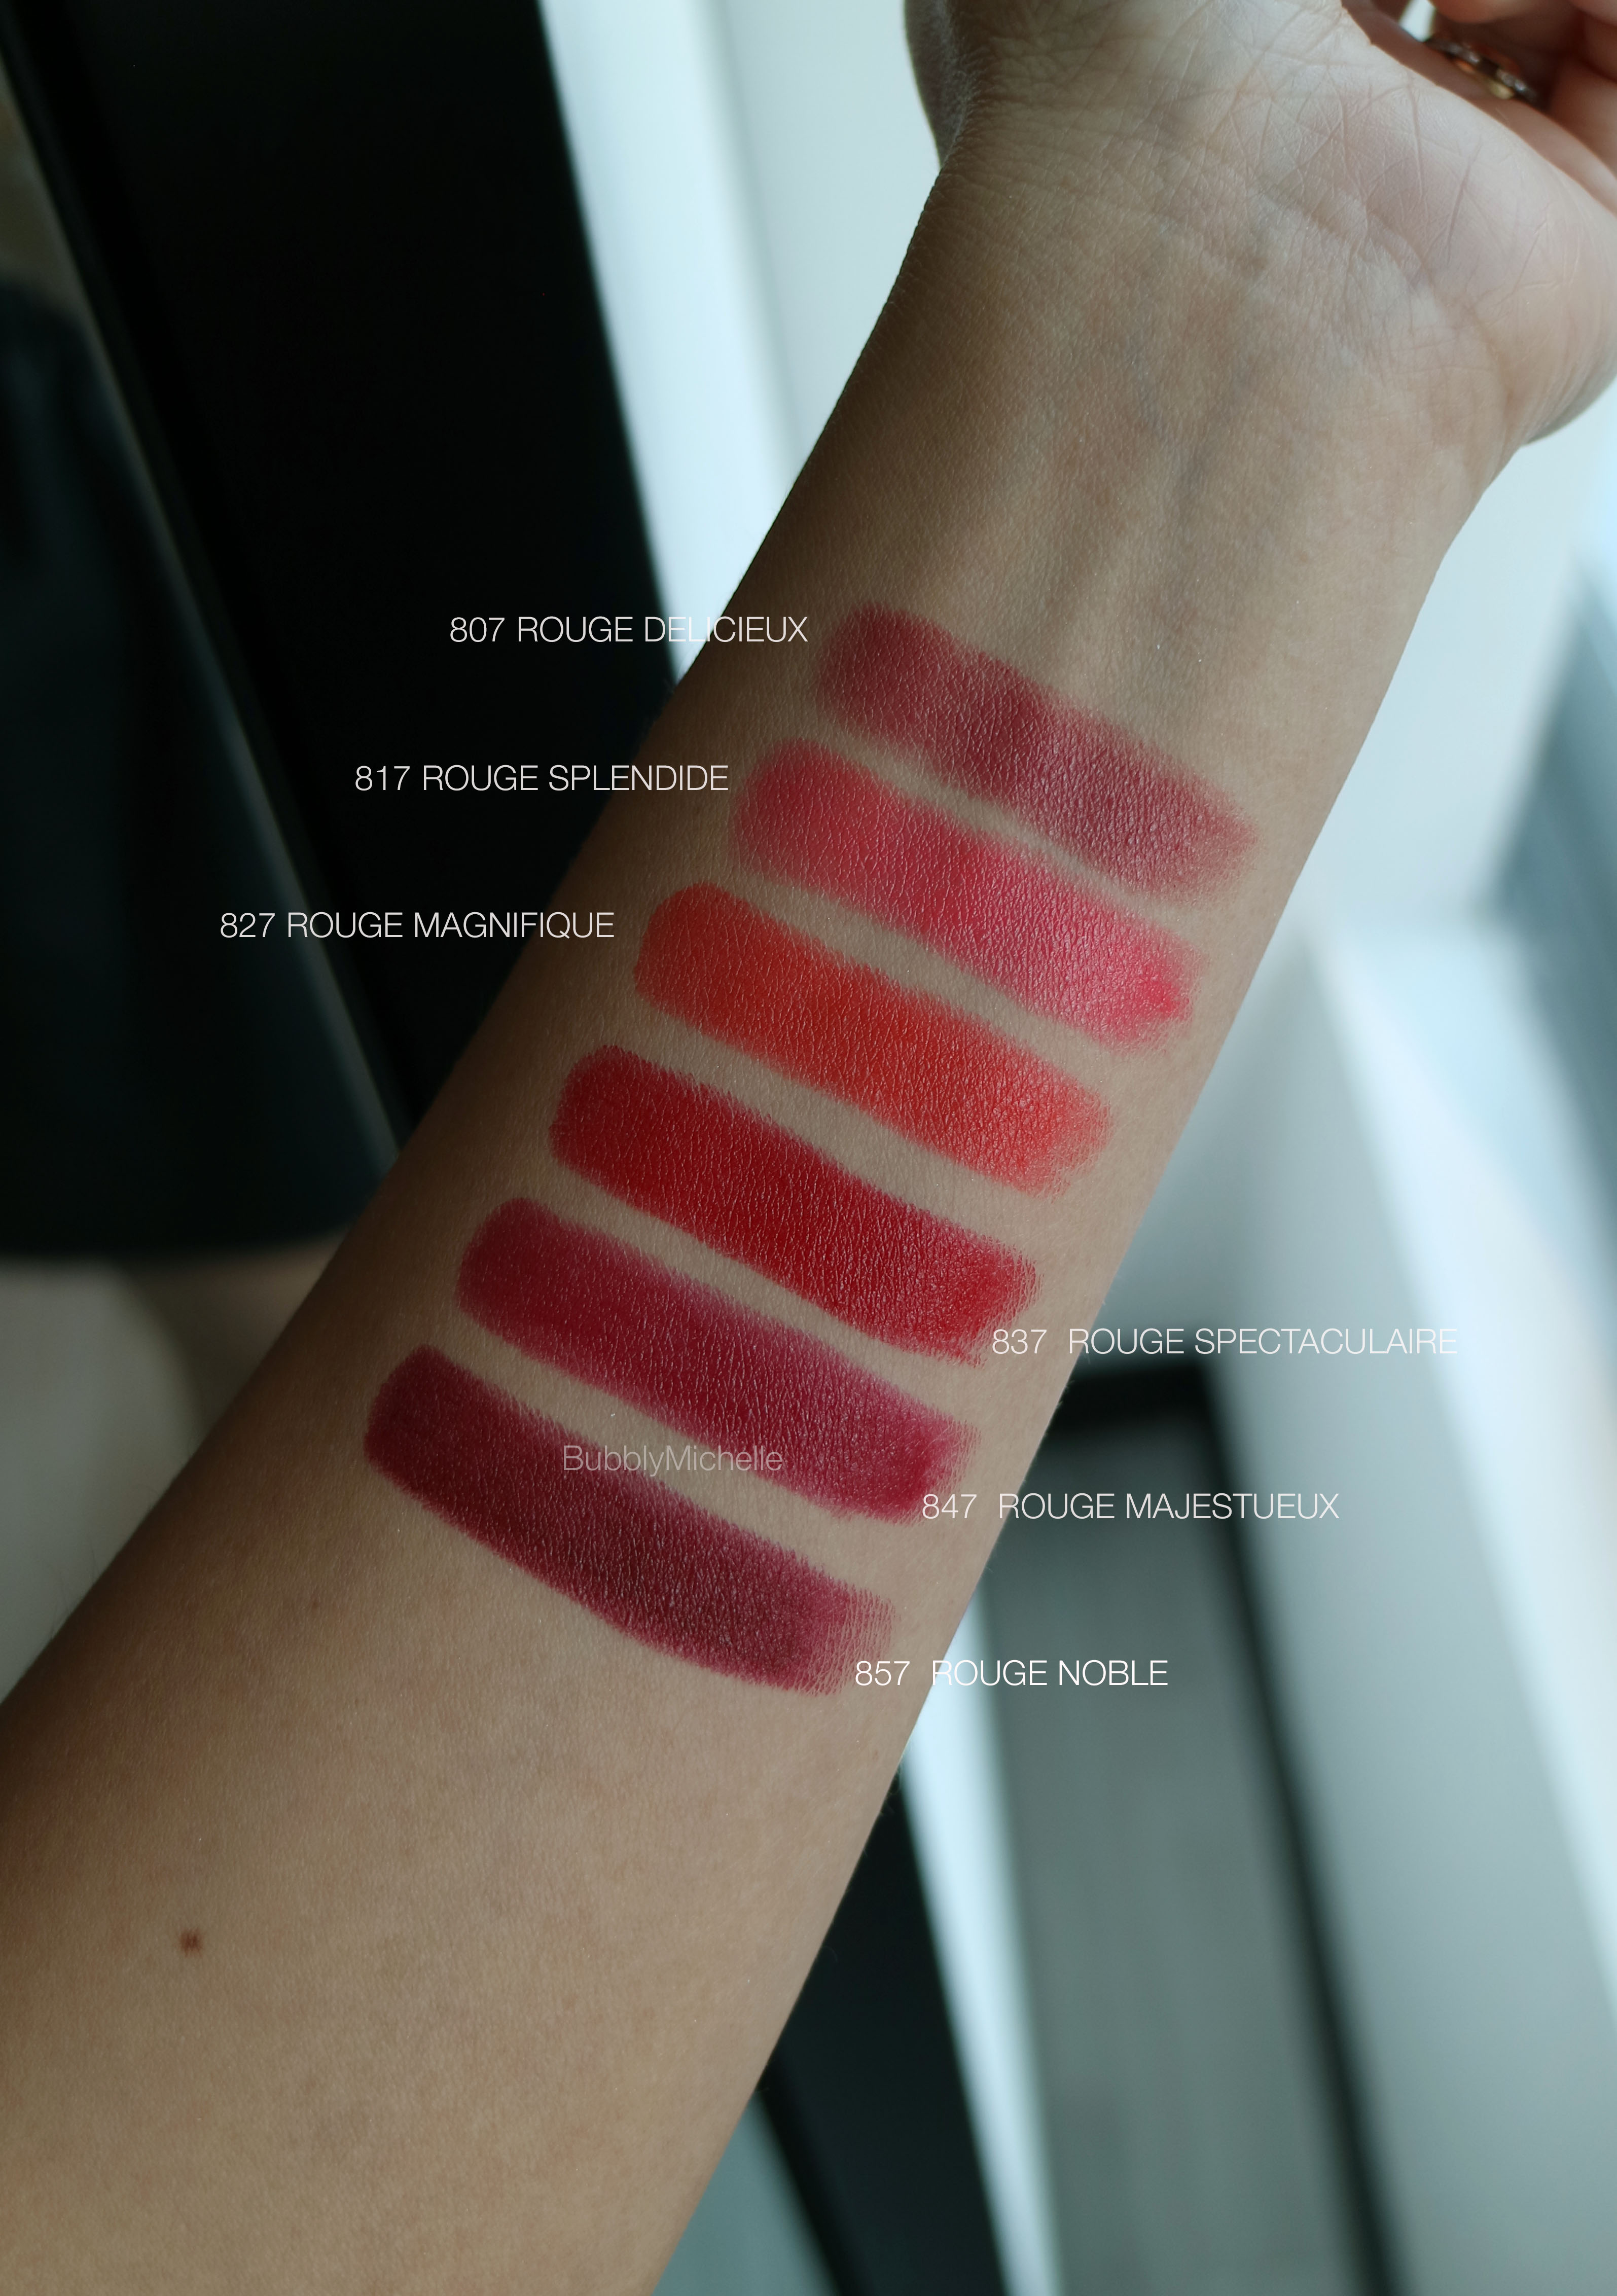 chanel-holiday-lipstick-swatches-natural-light.jpg